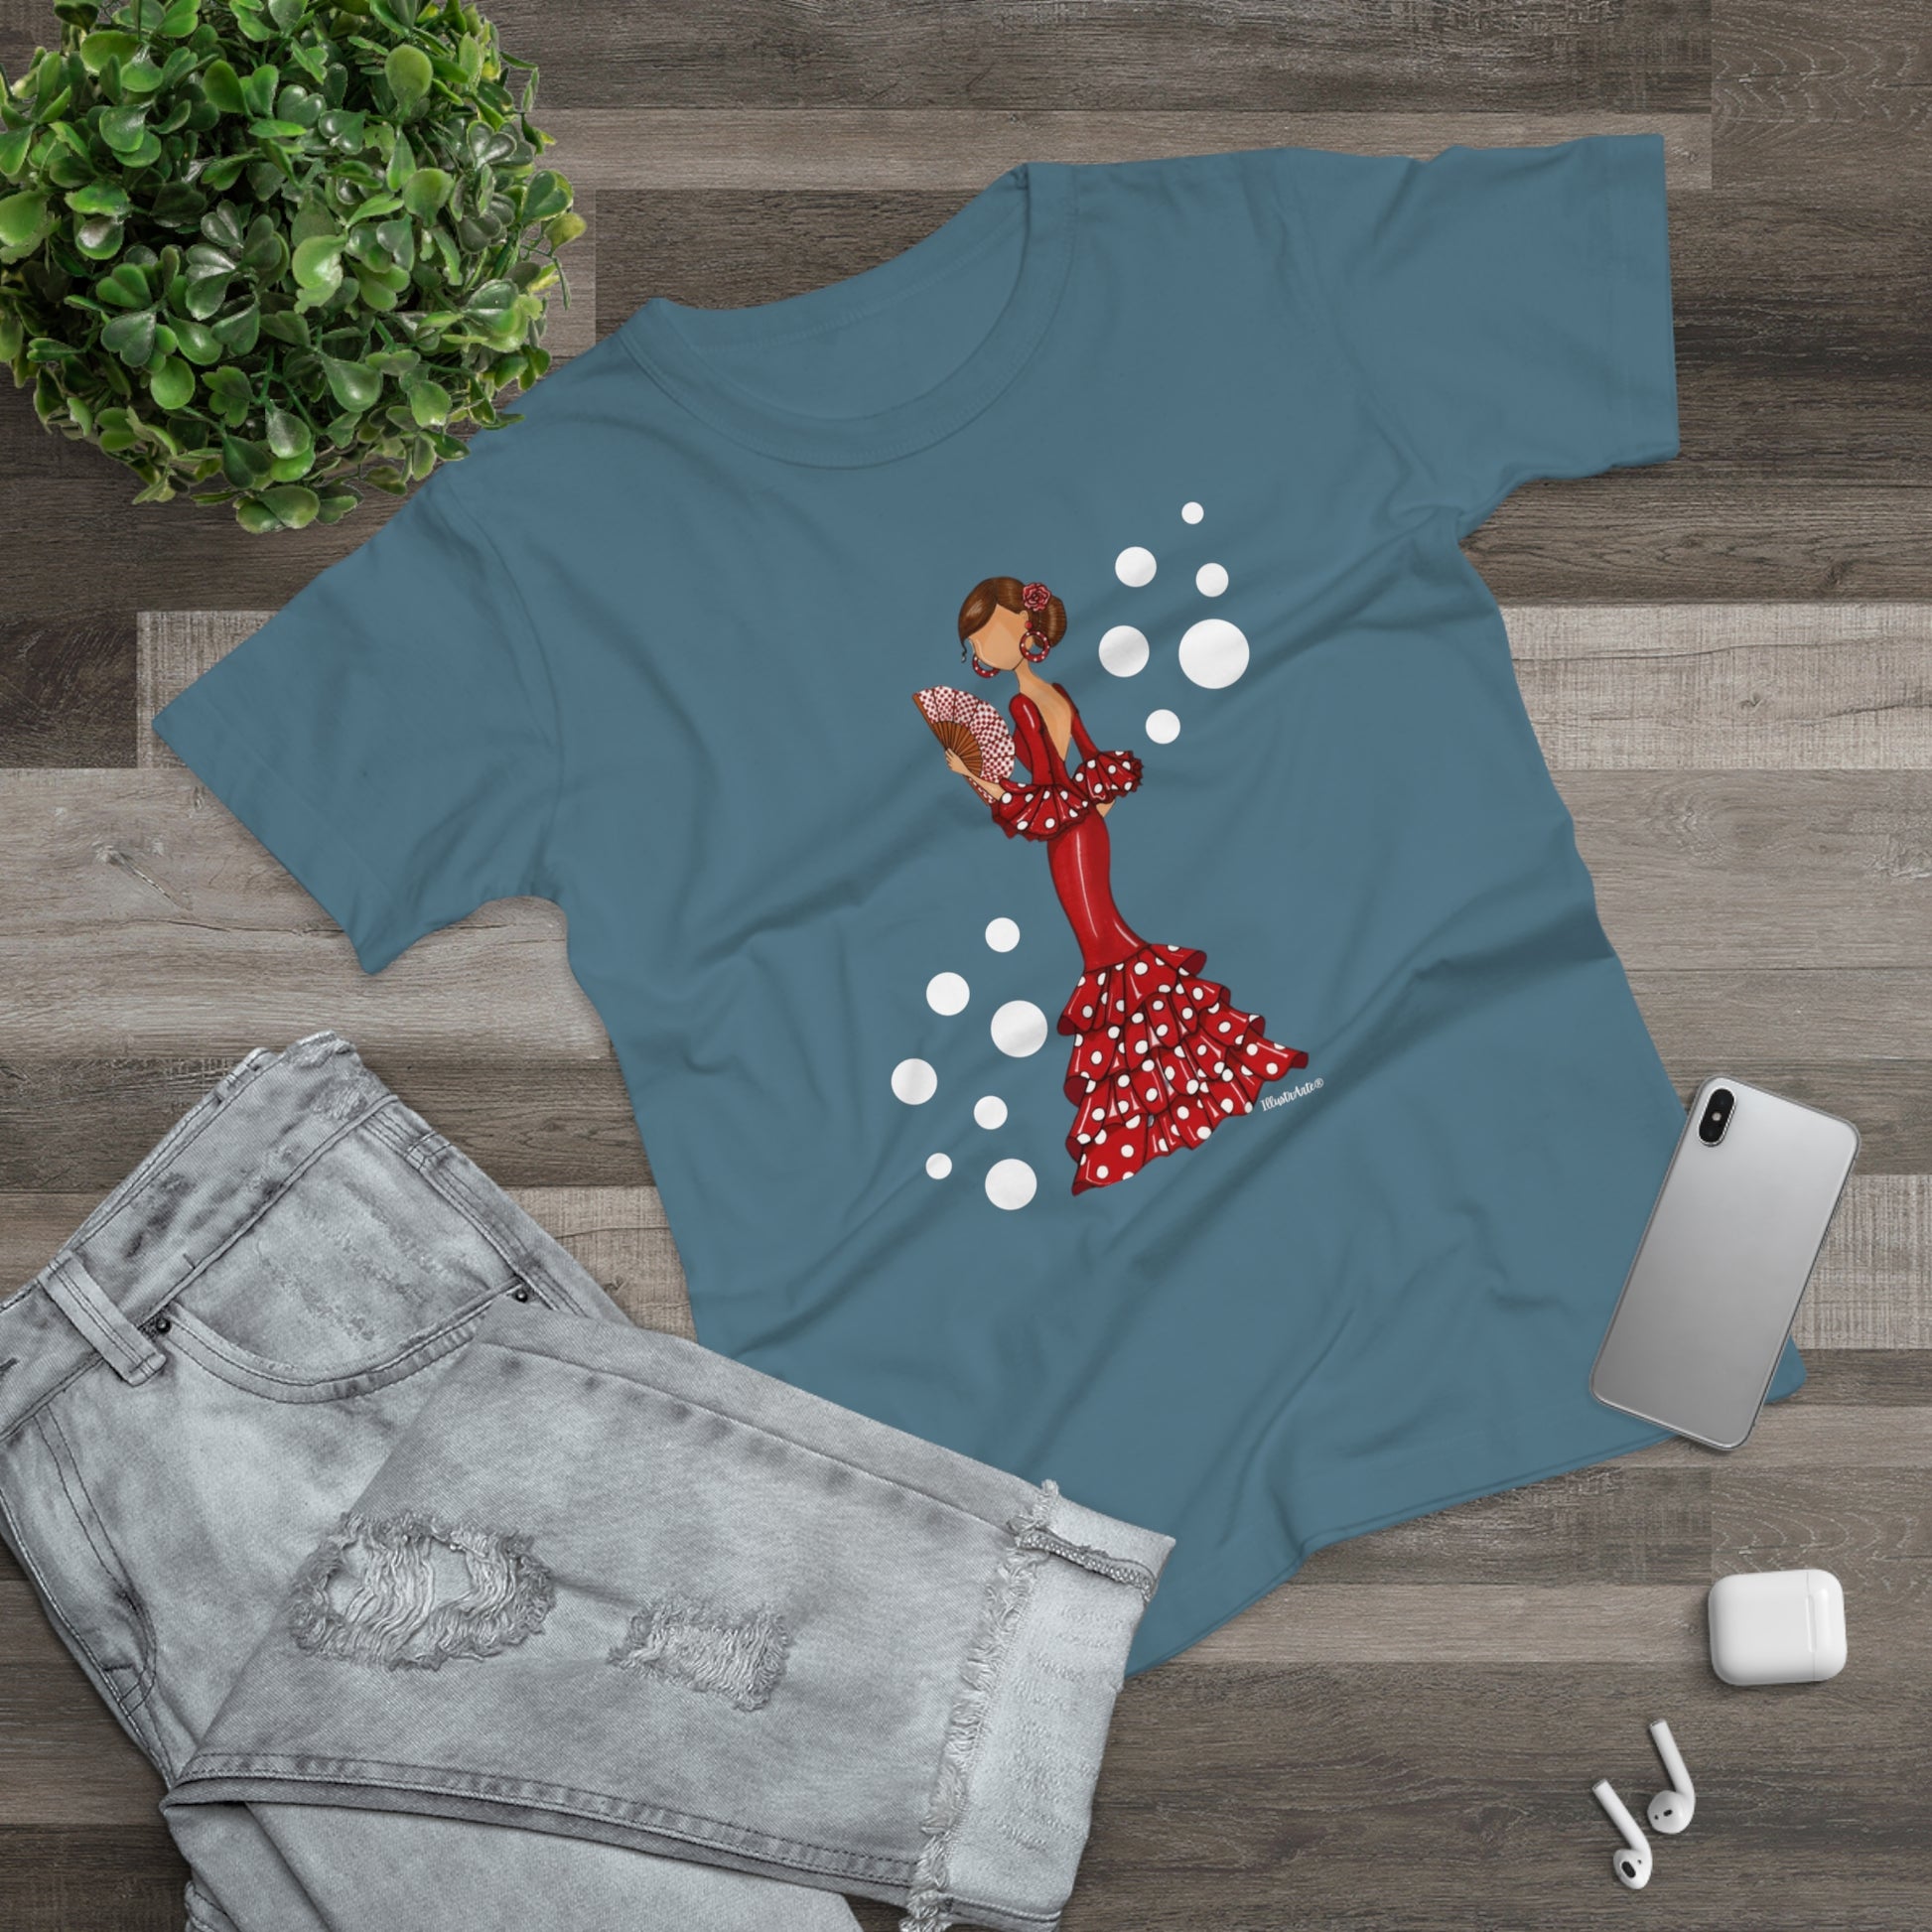 a t - shirt with a picture of a woman wearing a red polka dot dress